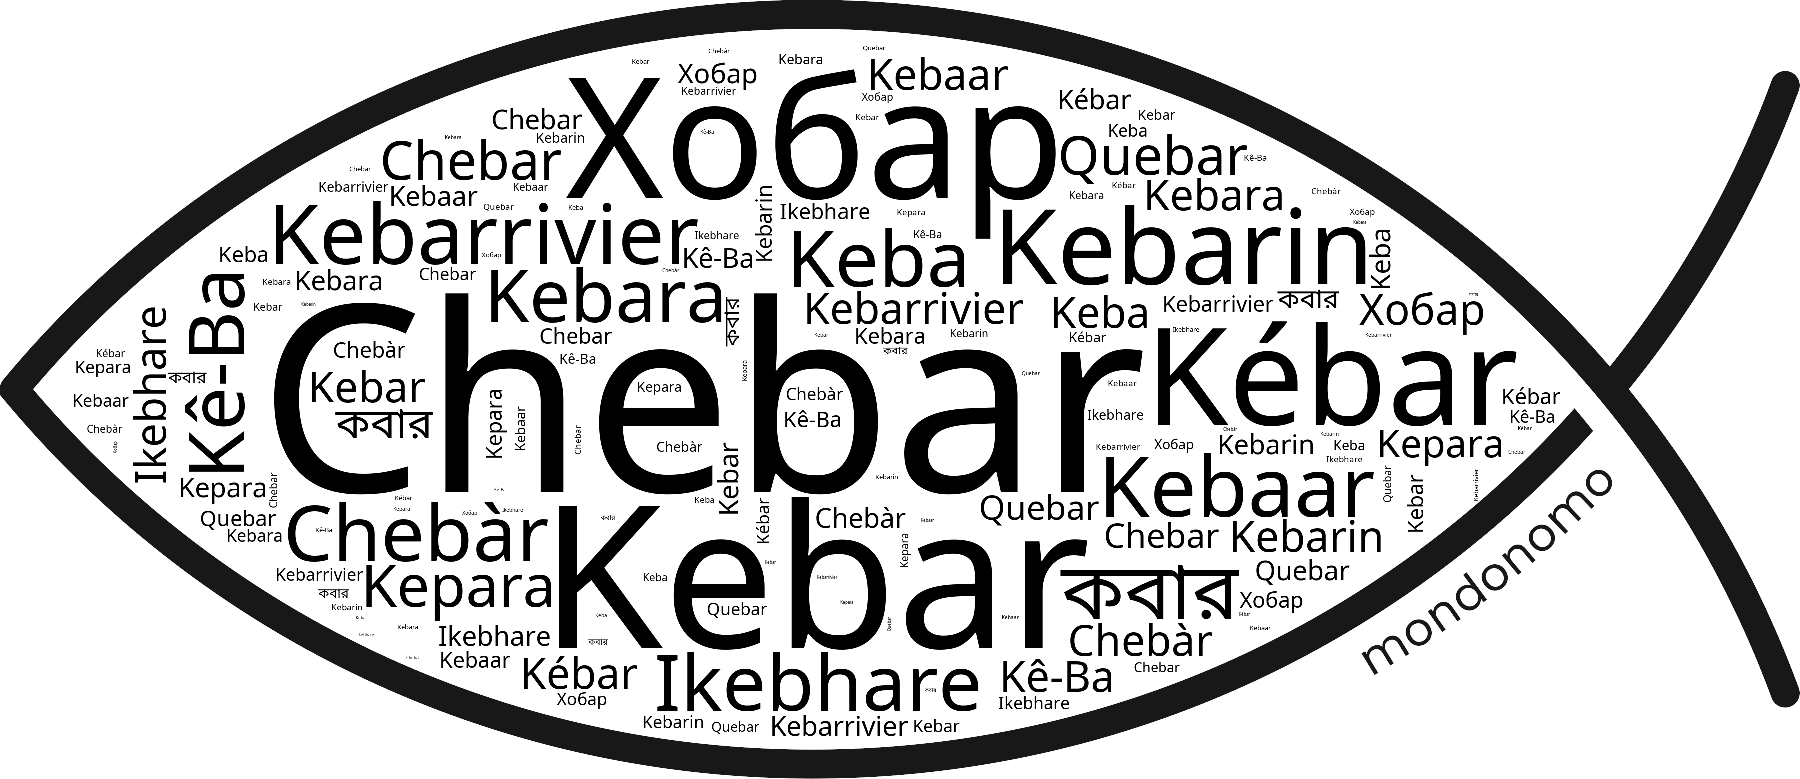 Name Chebar in the world's Bibles